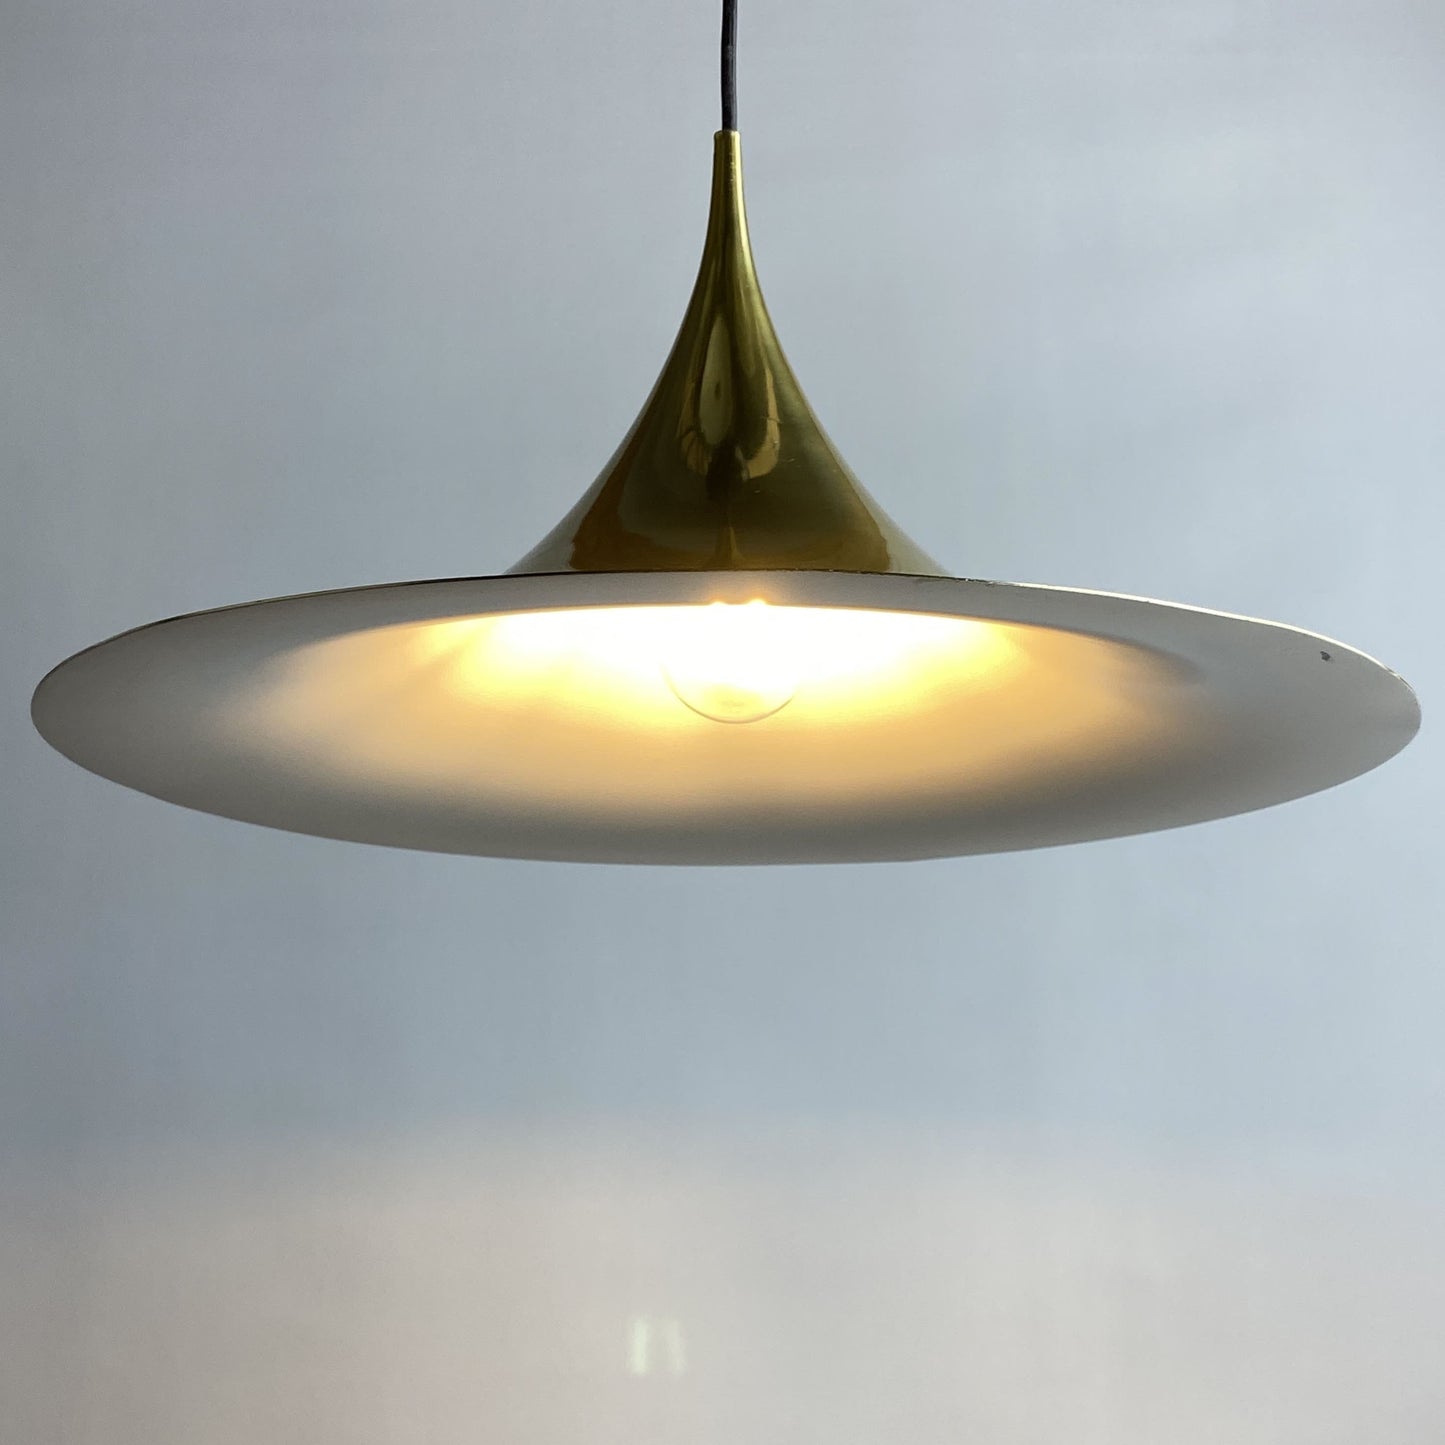 Brass 'Witchhat' Semi pendant light by Torsten Thorup and Claus Bonderup for Fog & Mørup